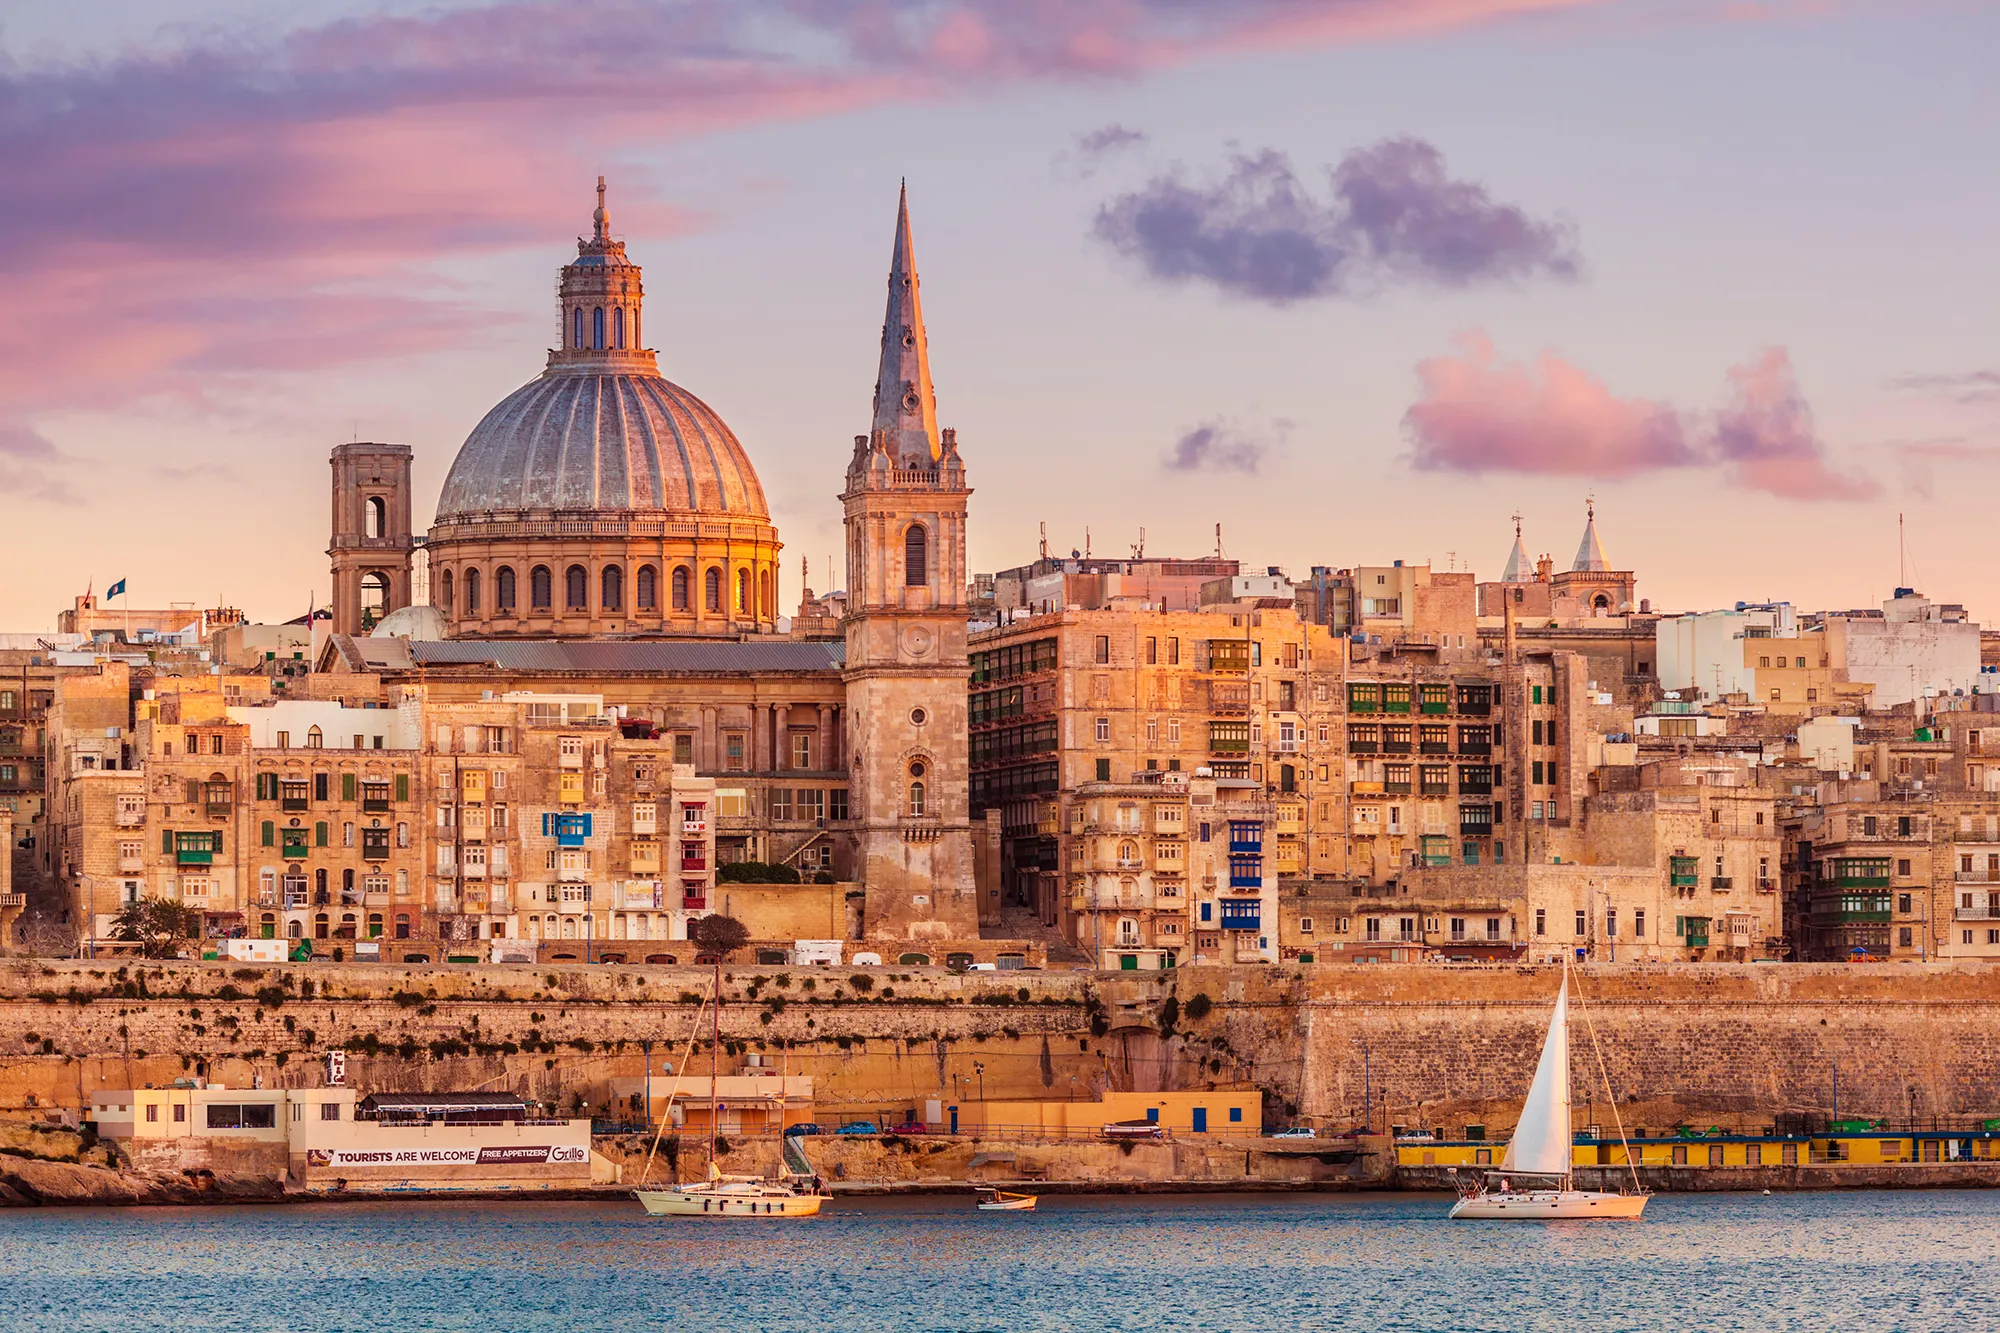 00 lede a travel guide to malta.jpg - Countrypedia